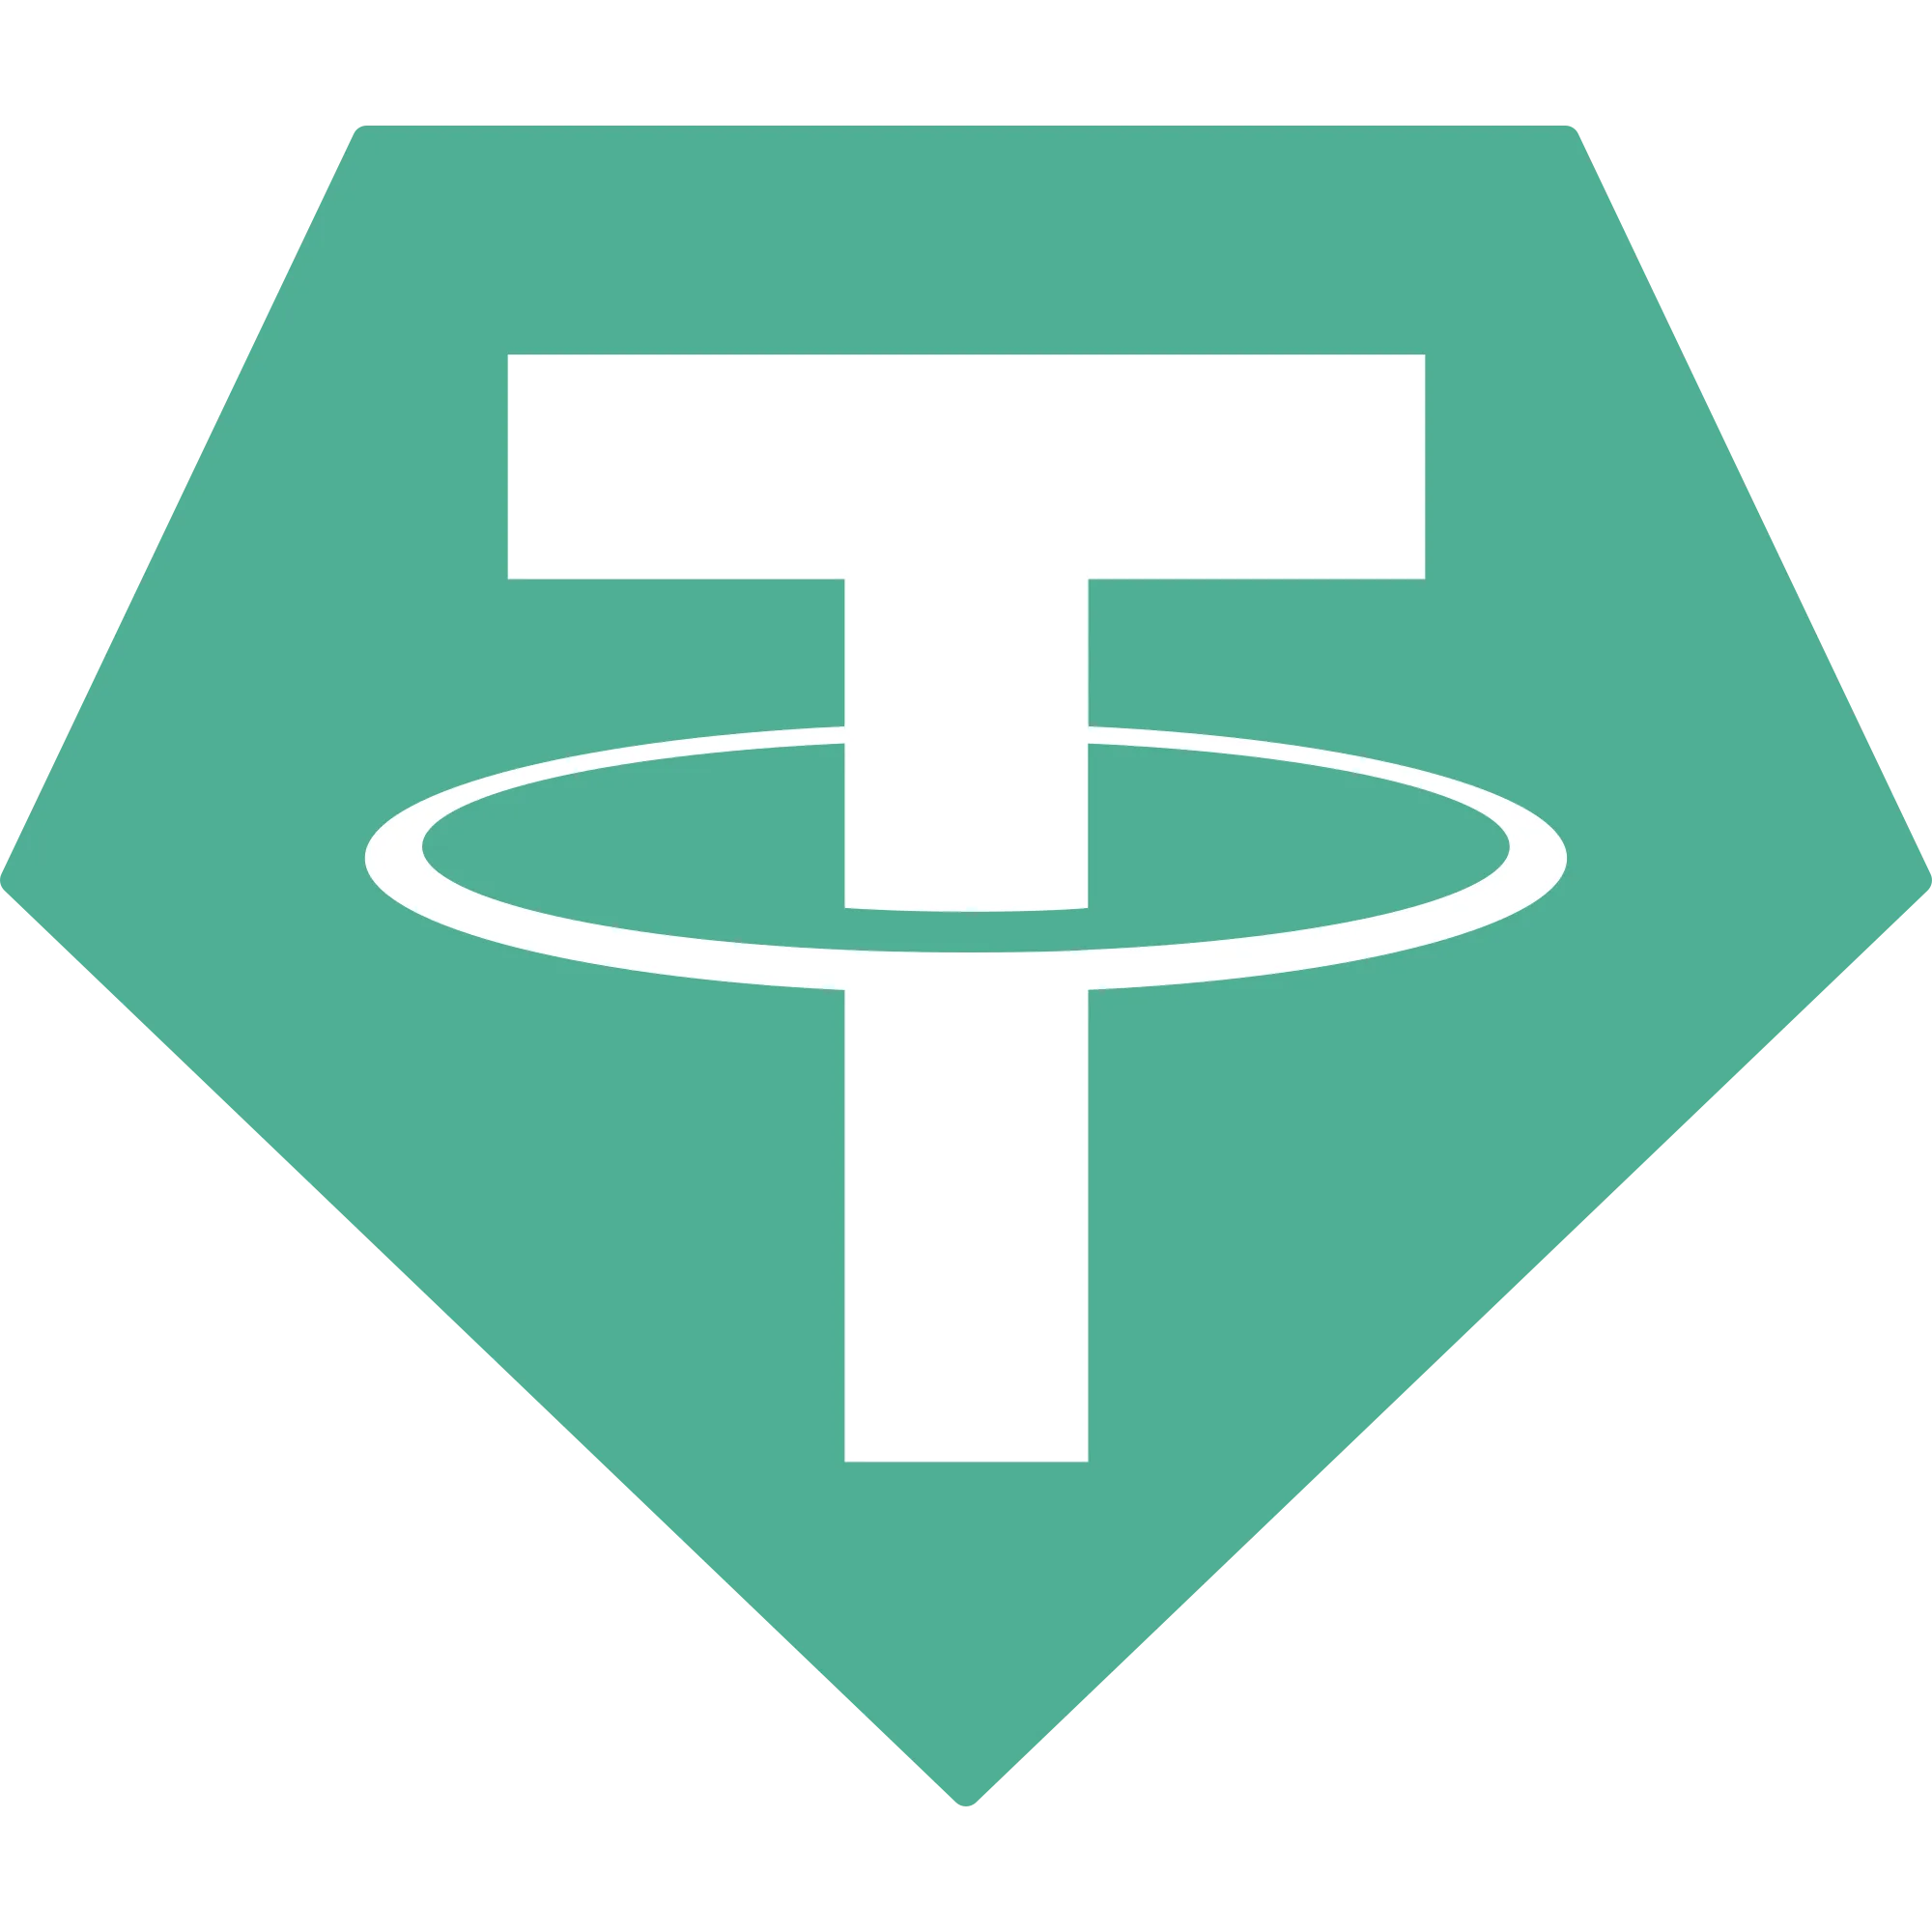 Tether logo in png format